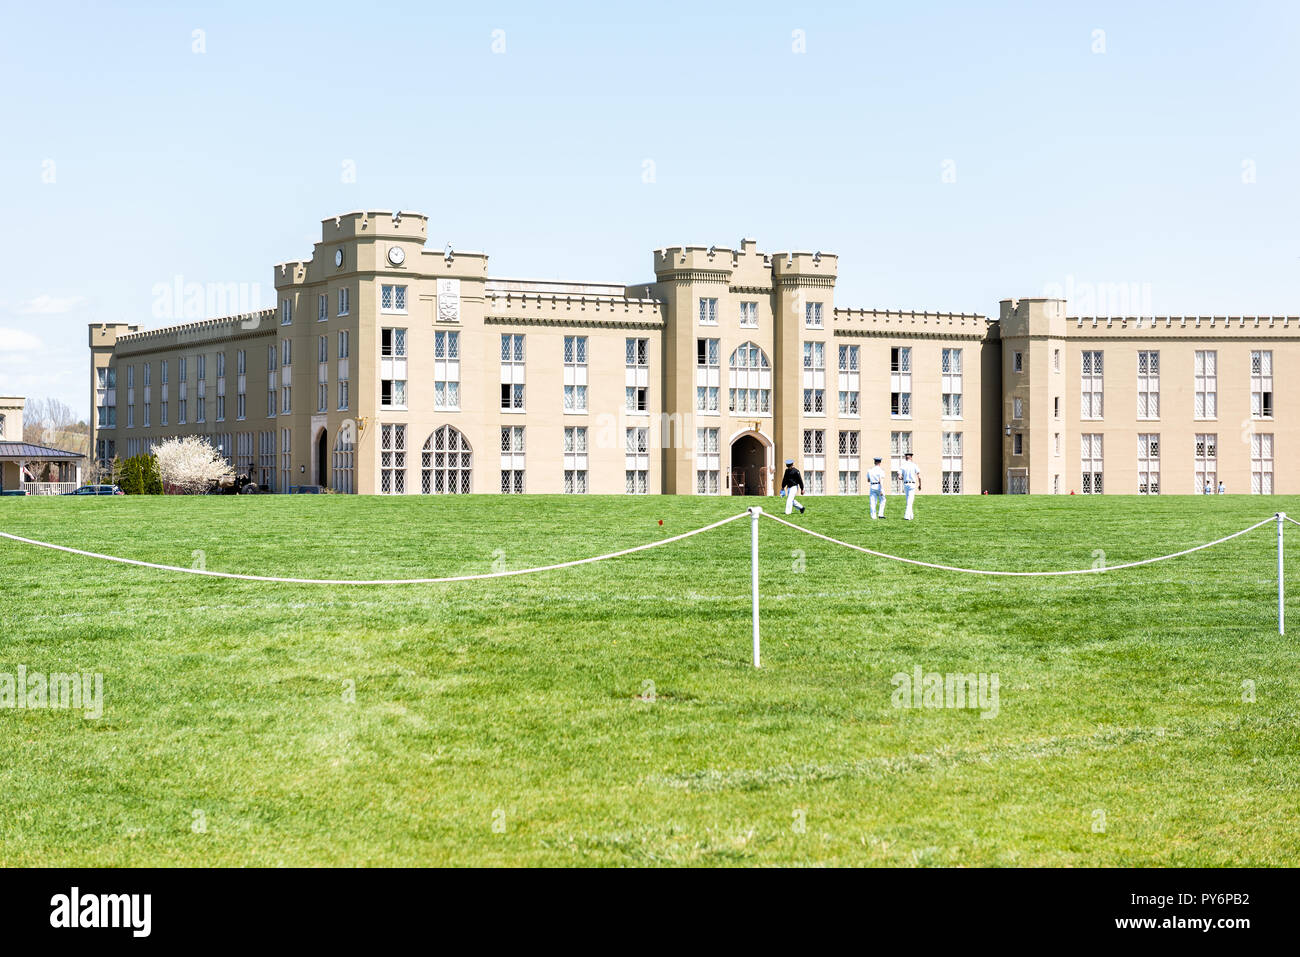 Lexington, USA - April 18, 2018: Virginia Military Institute cadets in uniform walking on green grass lawn during sunny day in front of Clayton Hall Stock Photo